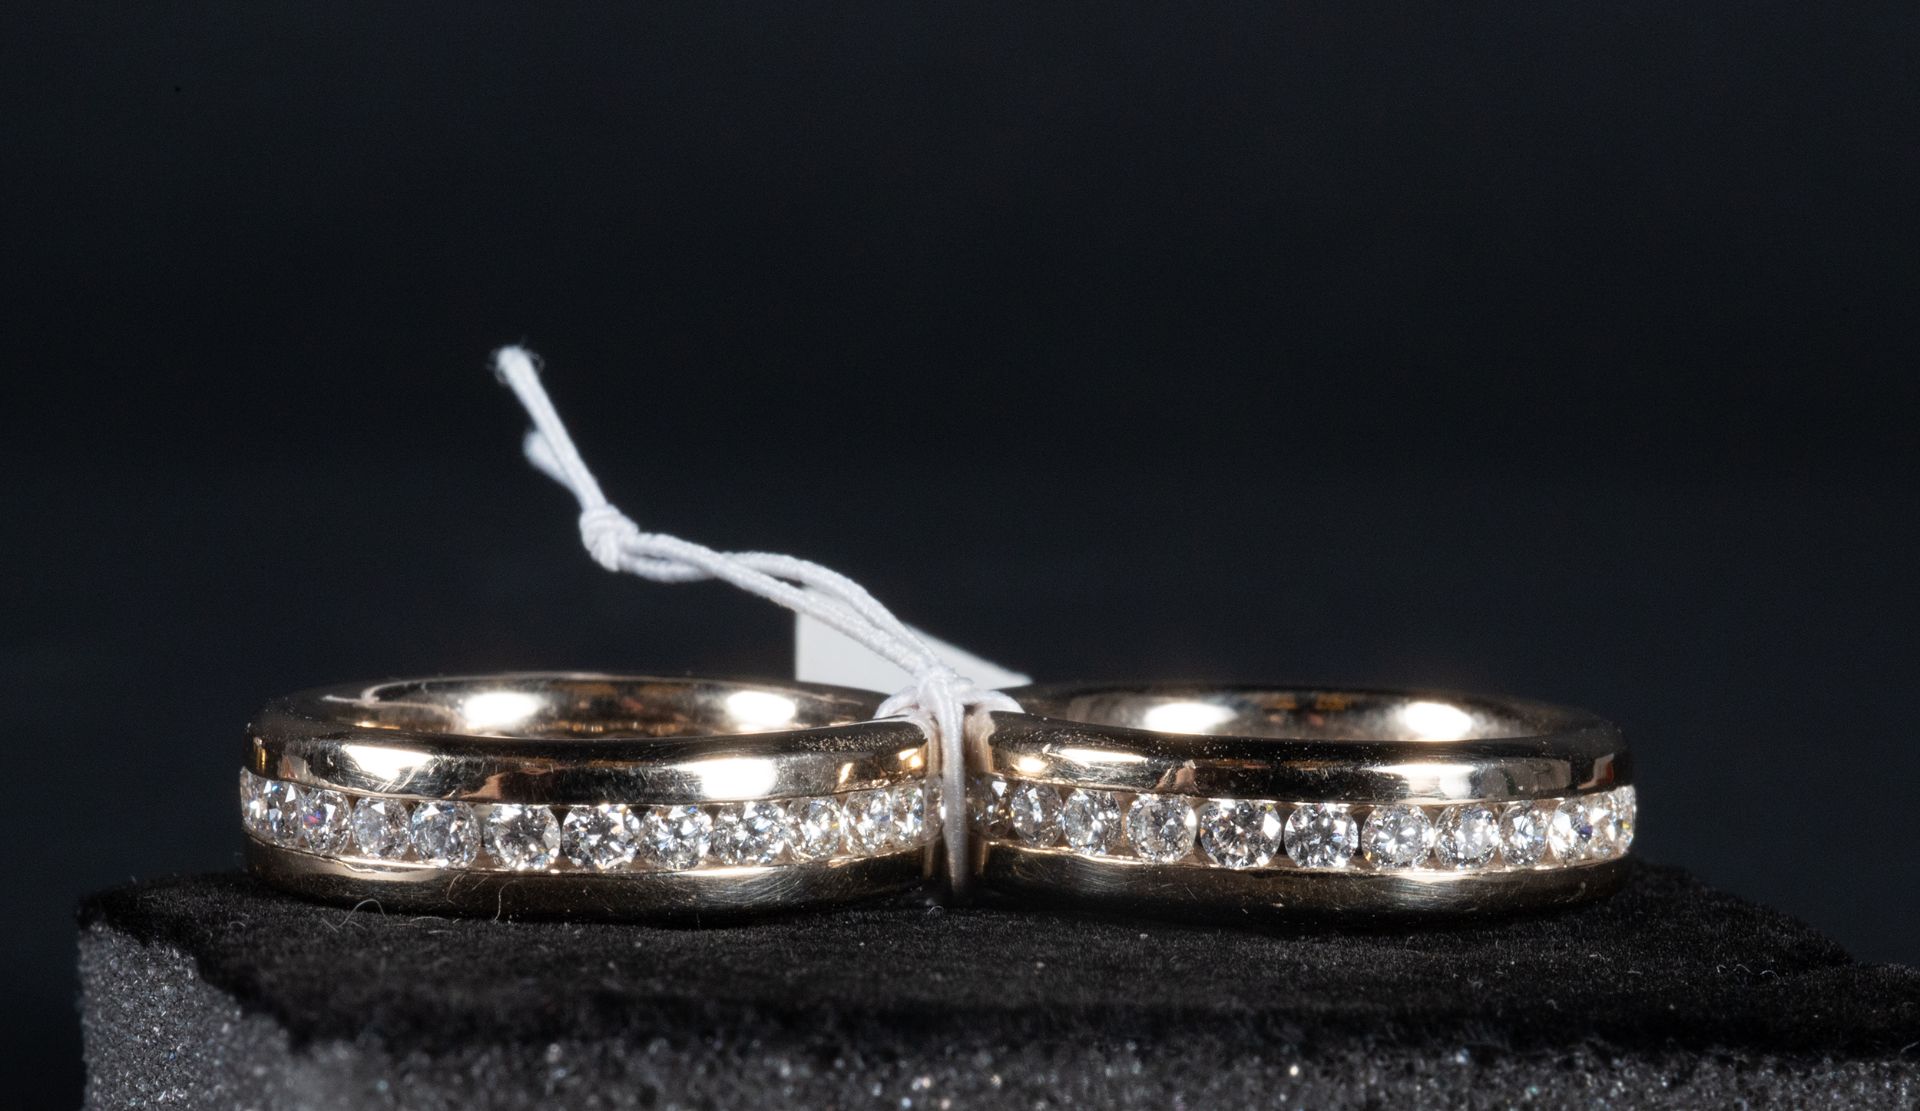 Pair of "you and me" rings in sterling white gold and brilliant cut diamonds